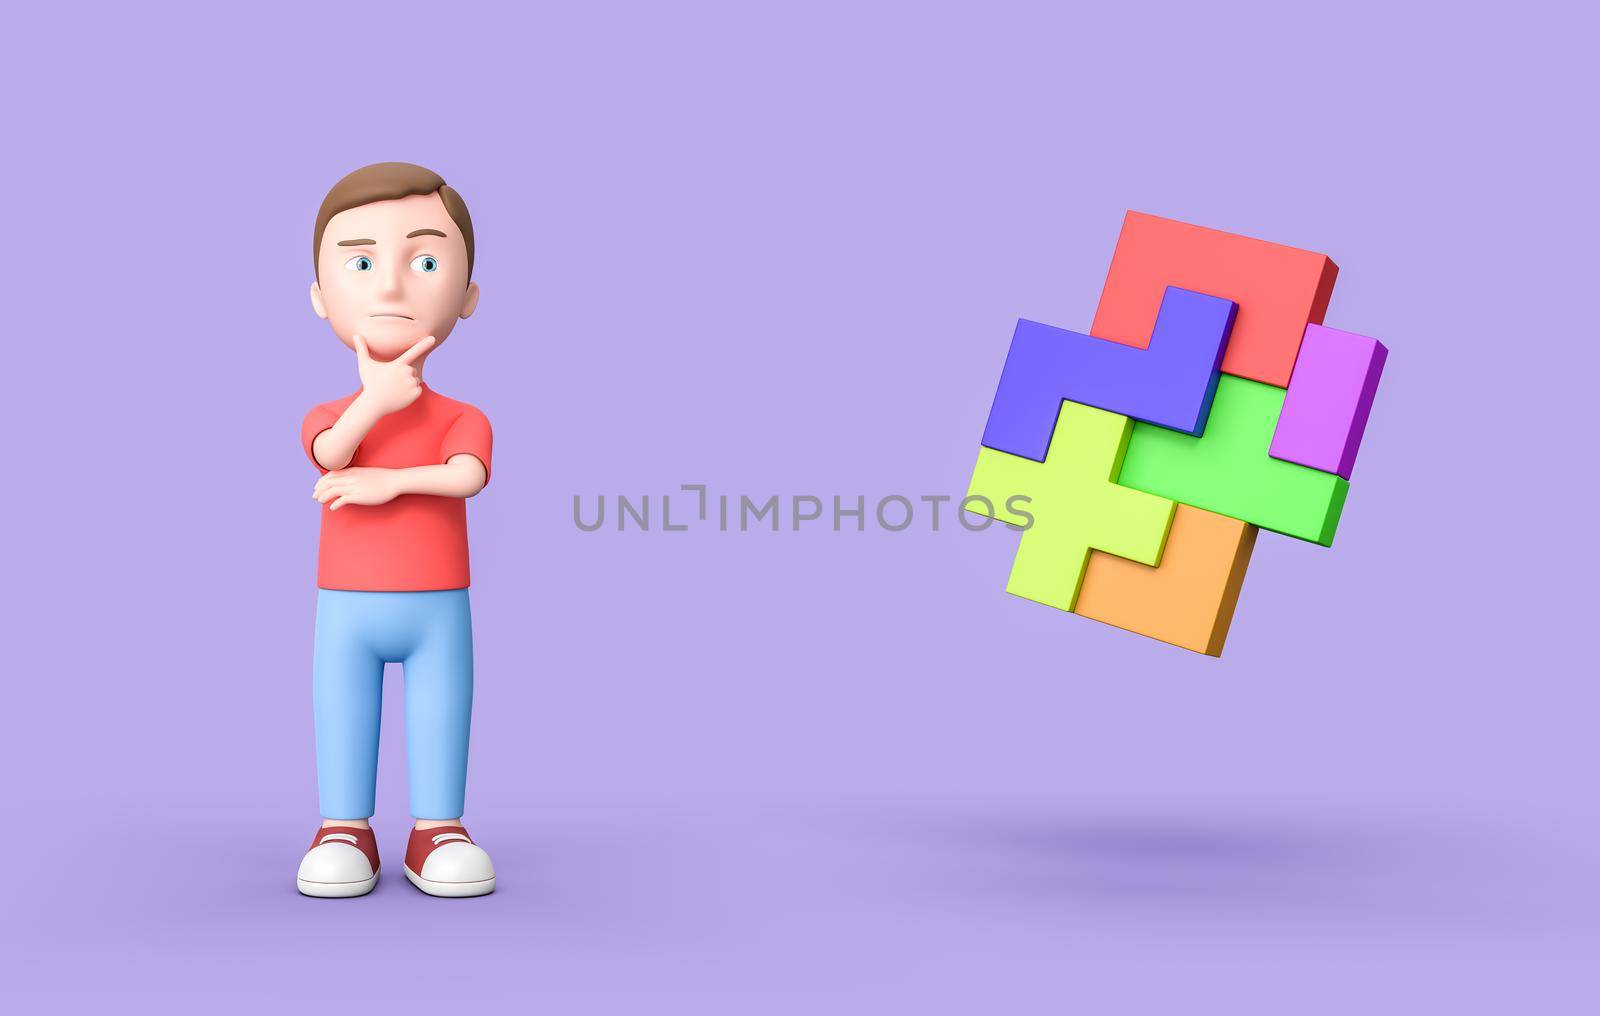 Thoughtful Young Kid 3D Cartoon Character and Colorful Blocks Combined on Purple Background 3D Illustration